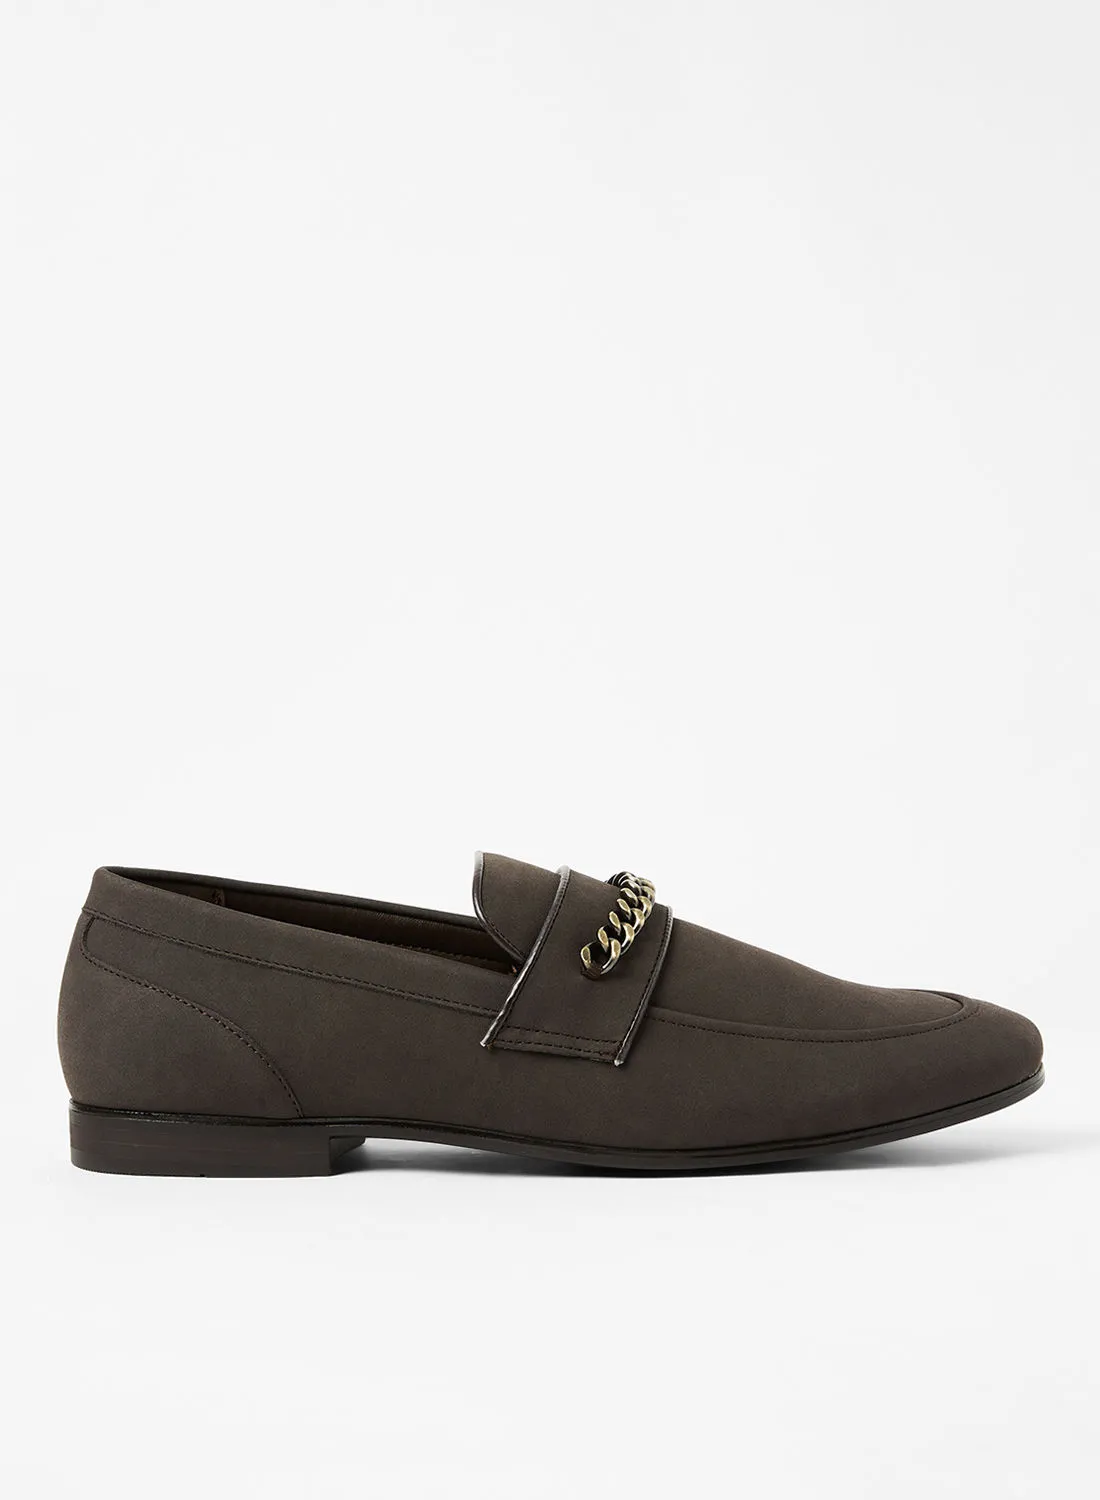 CALL IT SPRING Chained Loafers Brown